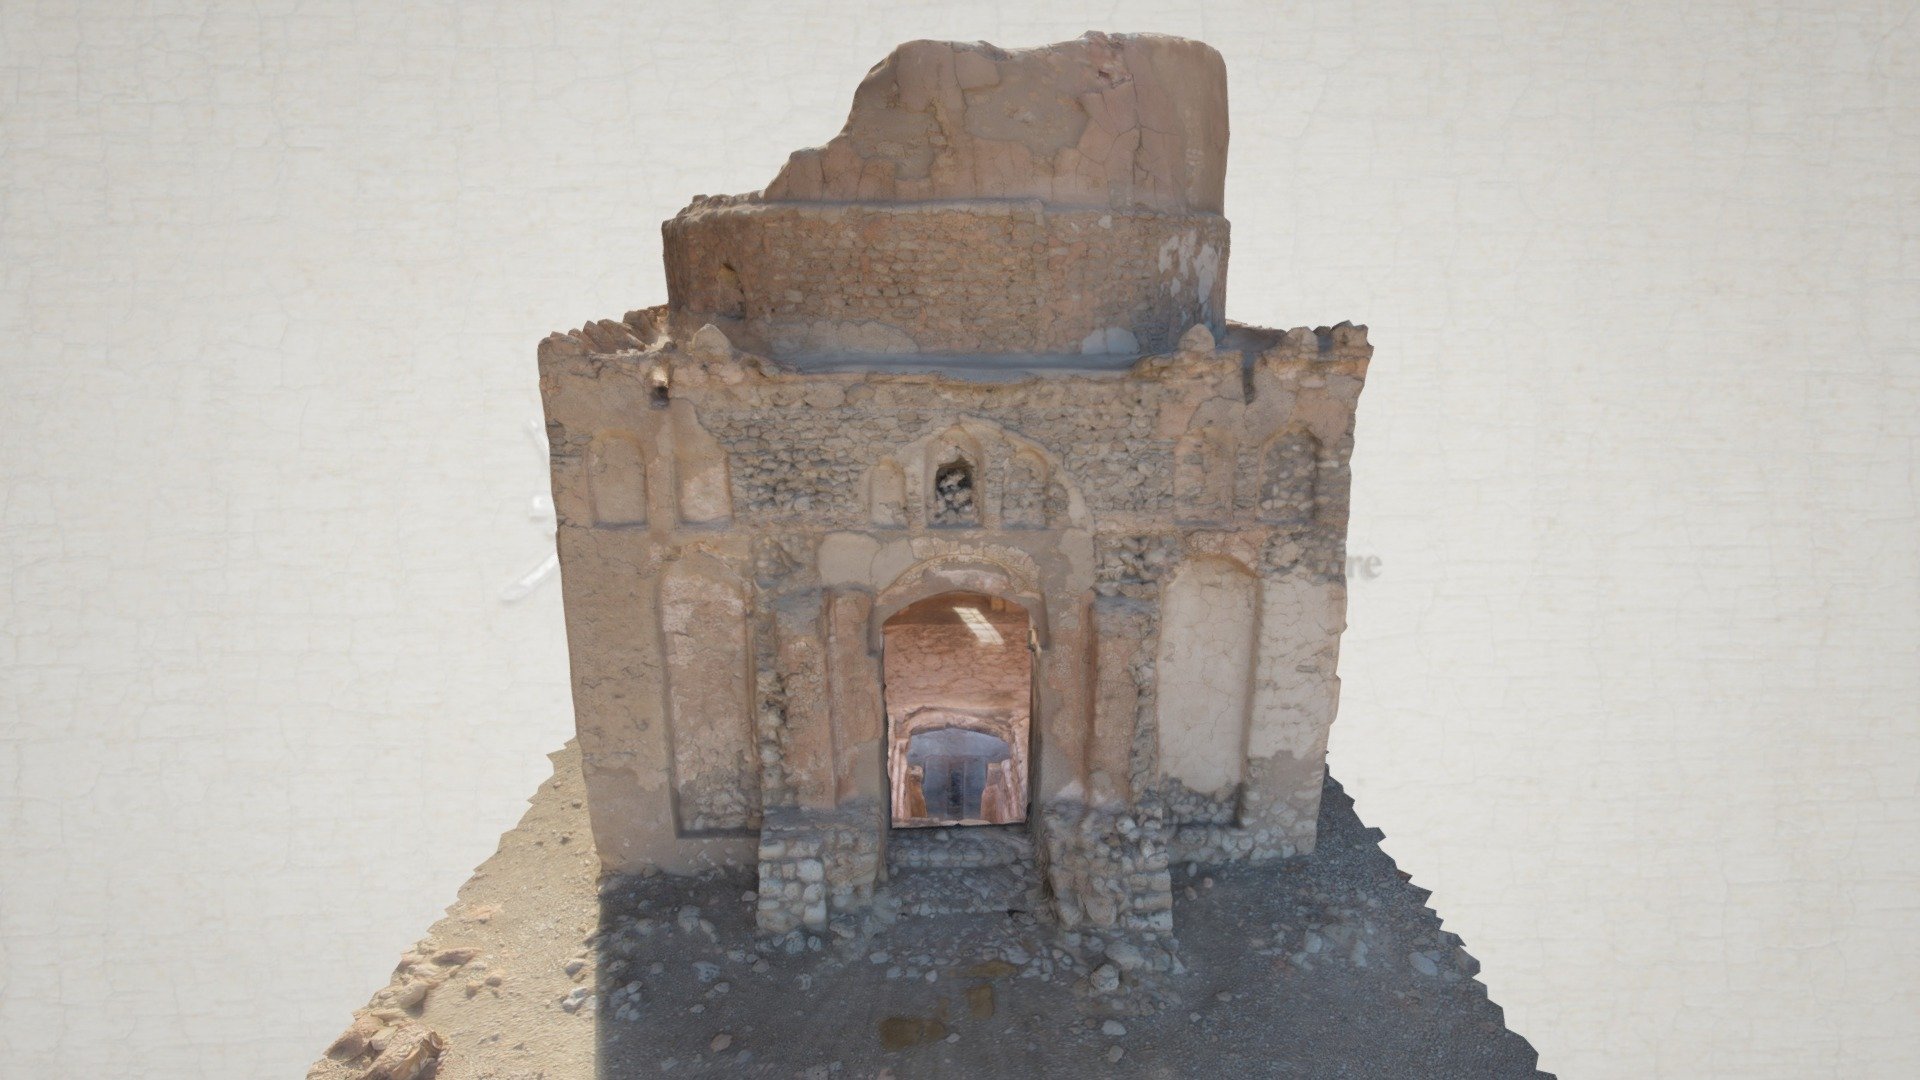 Mausoleum from the ancient city of Qalhat : http://en.wikipedia.org/wiki/Qalhat

Iconem develops digitizing and 3D modeling techniques for cultural heritage.
More :
https://www.youtube.com/user/iconem - Bibi Maryam mausoleum - 3D model by Iconem 3d model